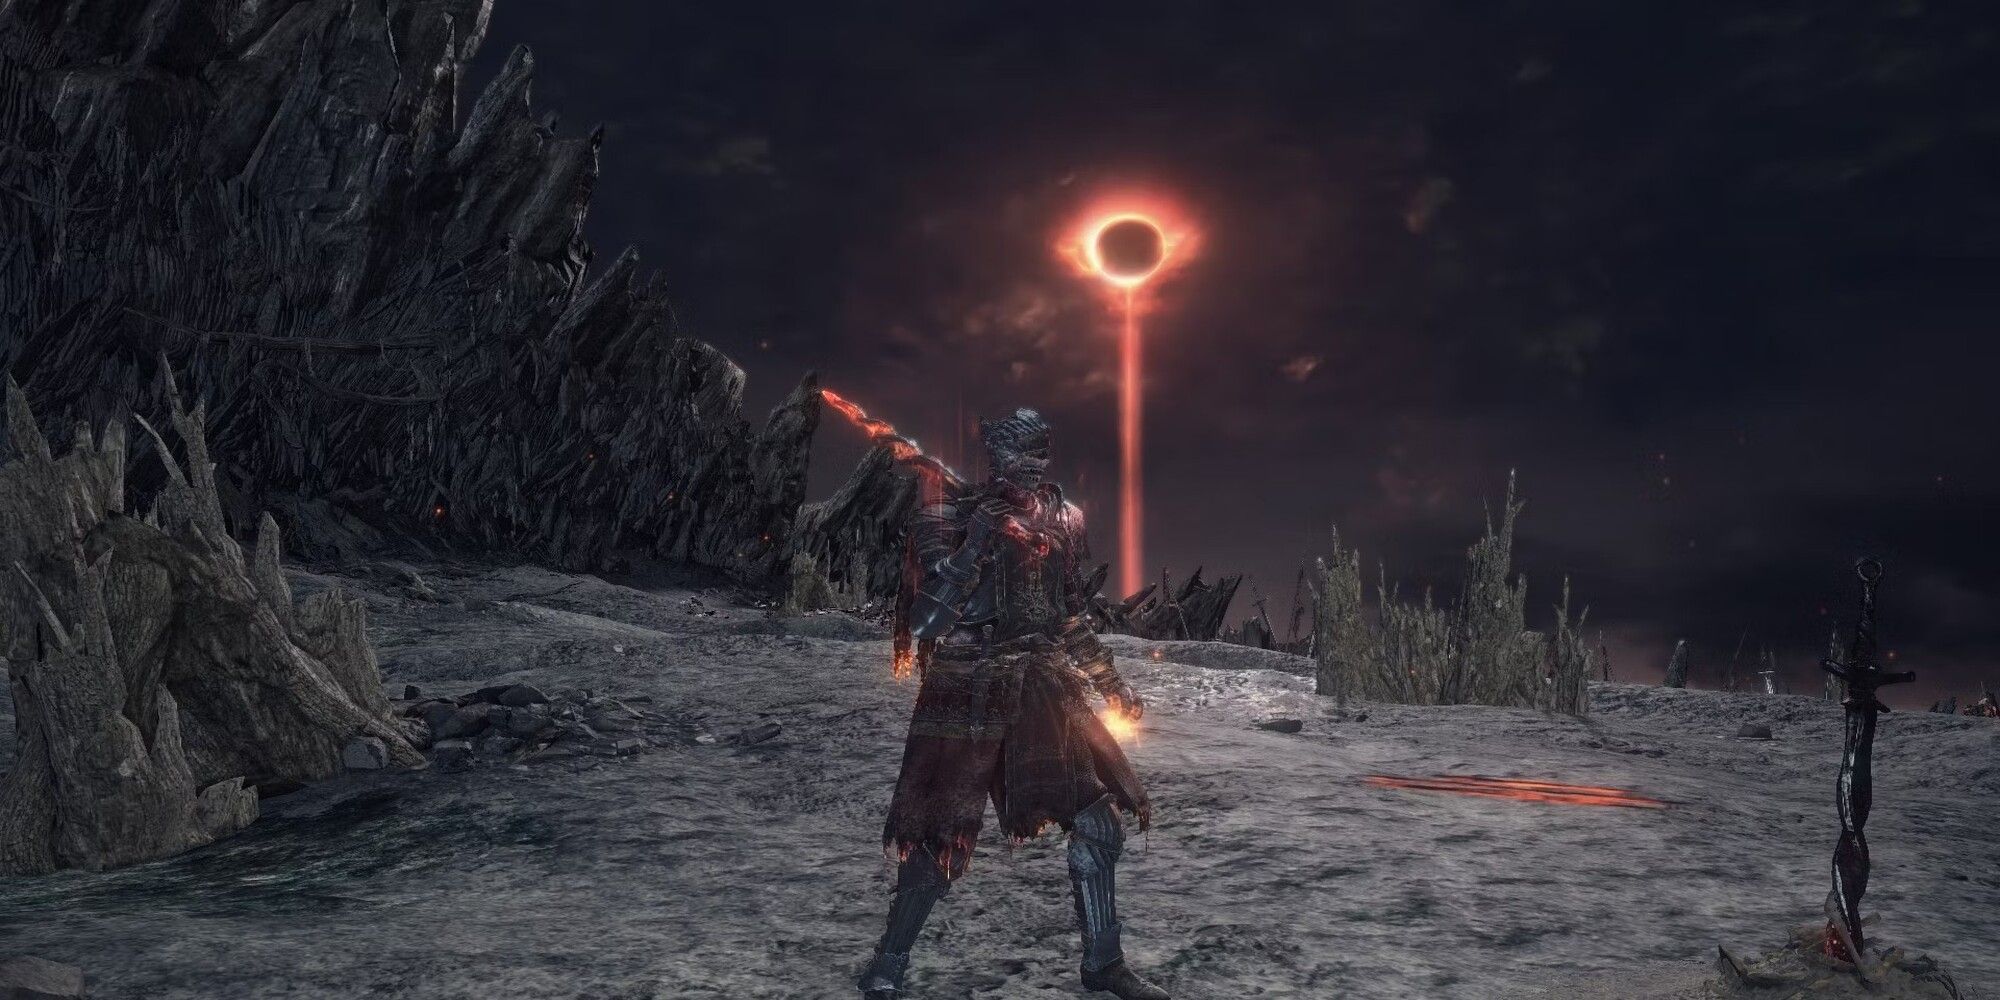 The player grabbing the unique Greatsword in a deserted line where an eclipse is taking place in Dark Souls 3